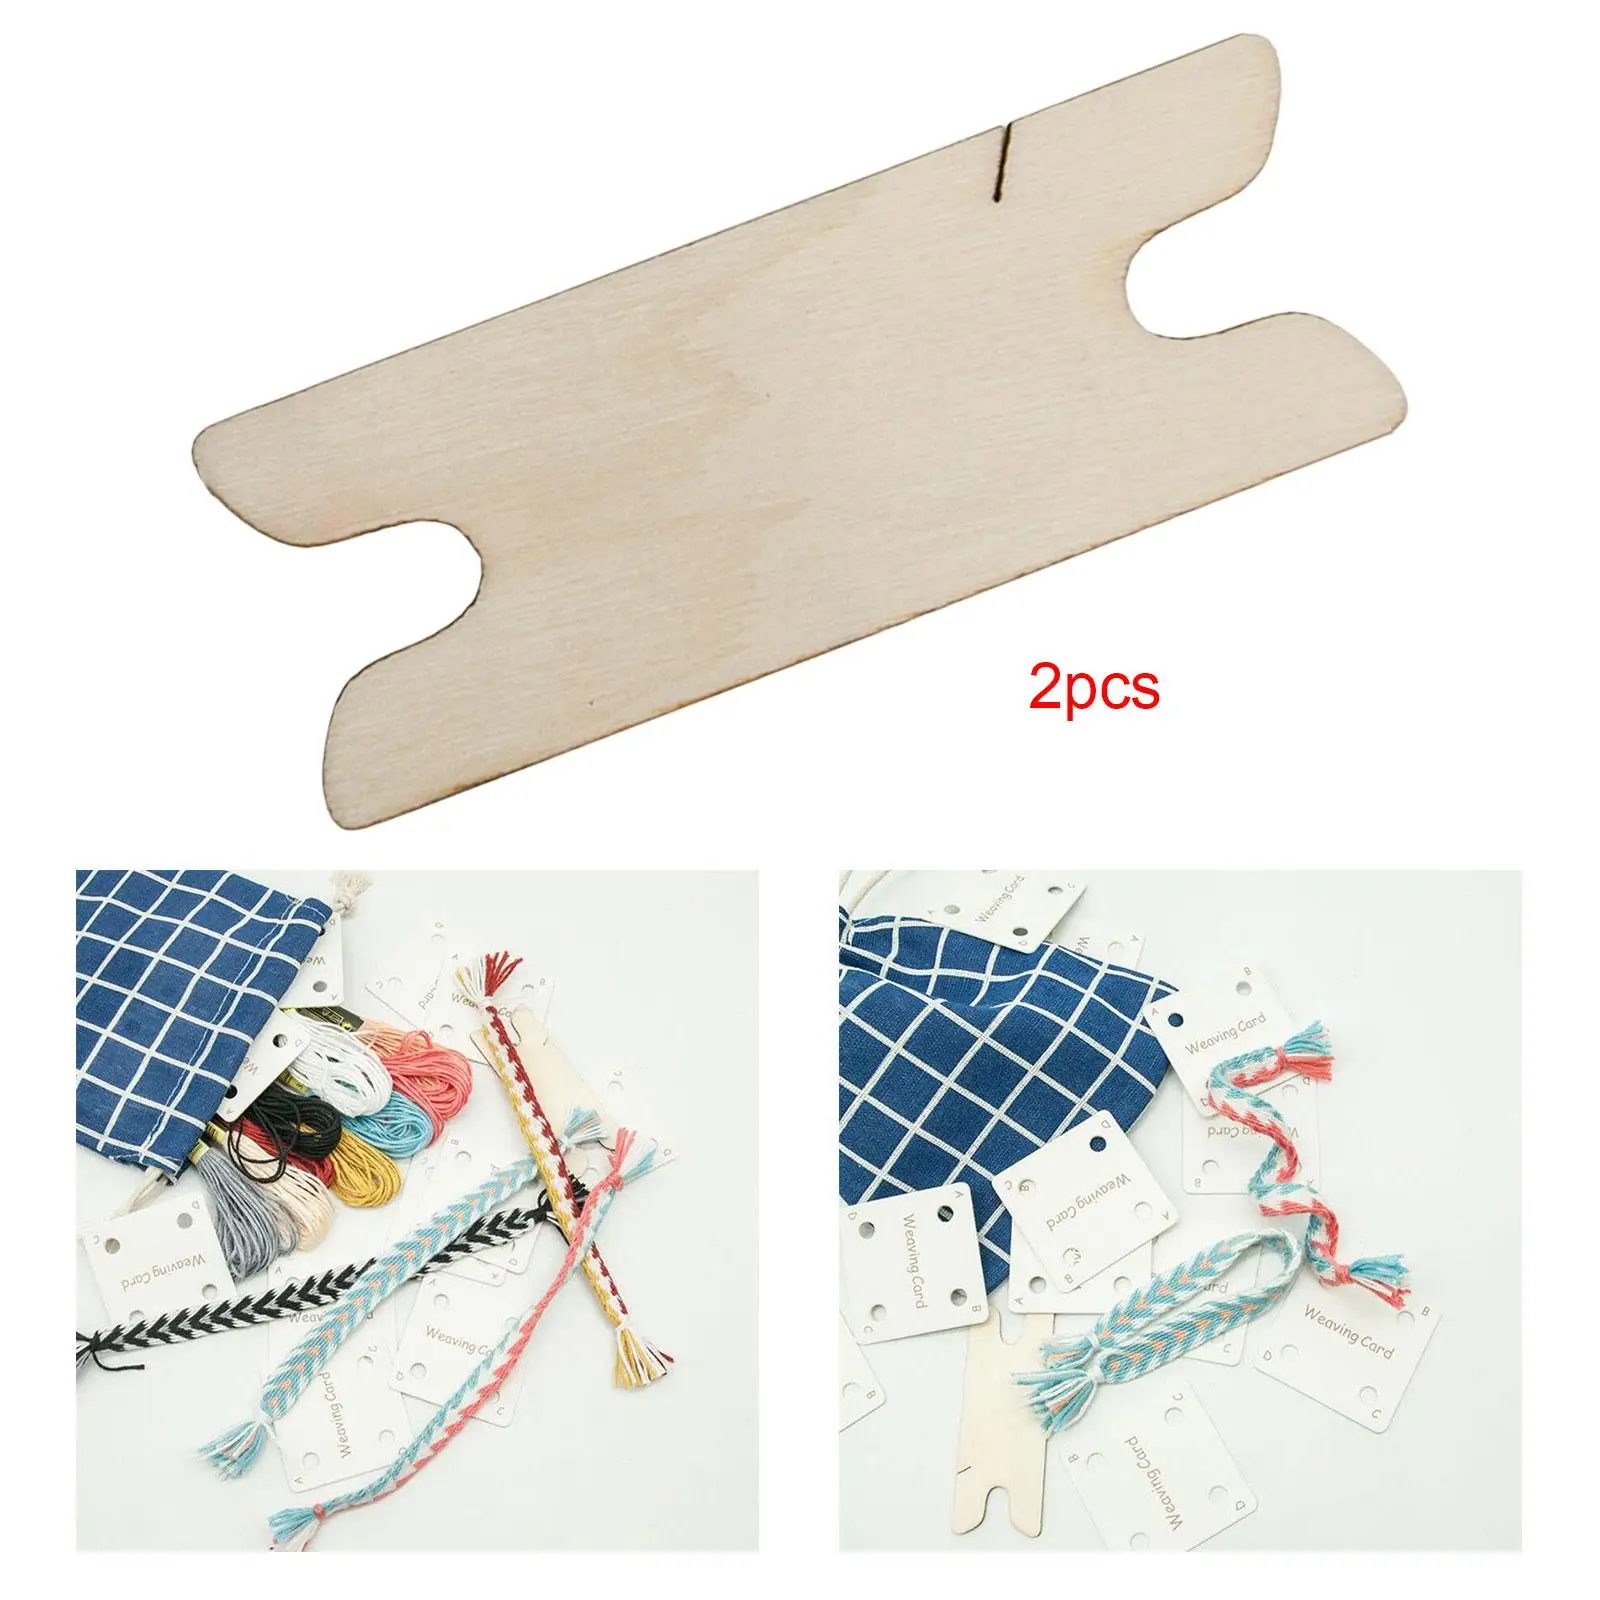 2 Pieces Wooden Weaving Shuttle Tapestry Handcrafts Tatting Shuttle Convenient DIY Cross Stitch Loom Tools Sewing Accessories